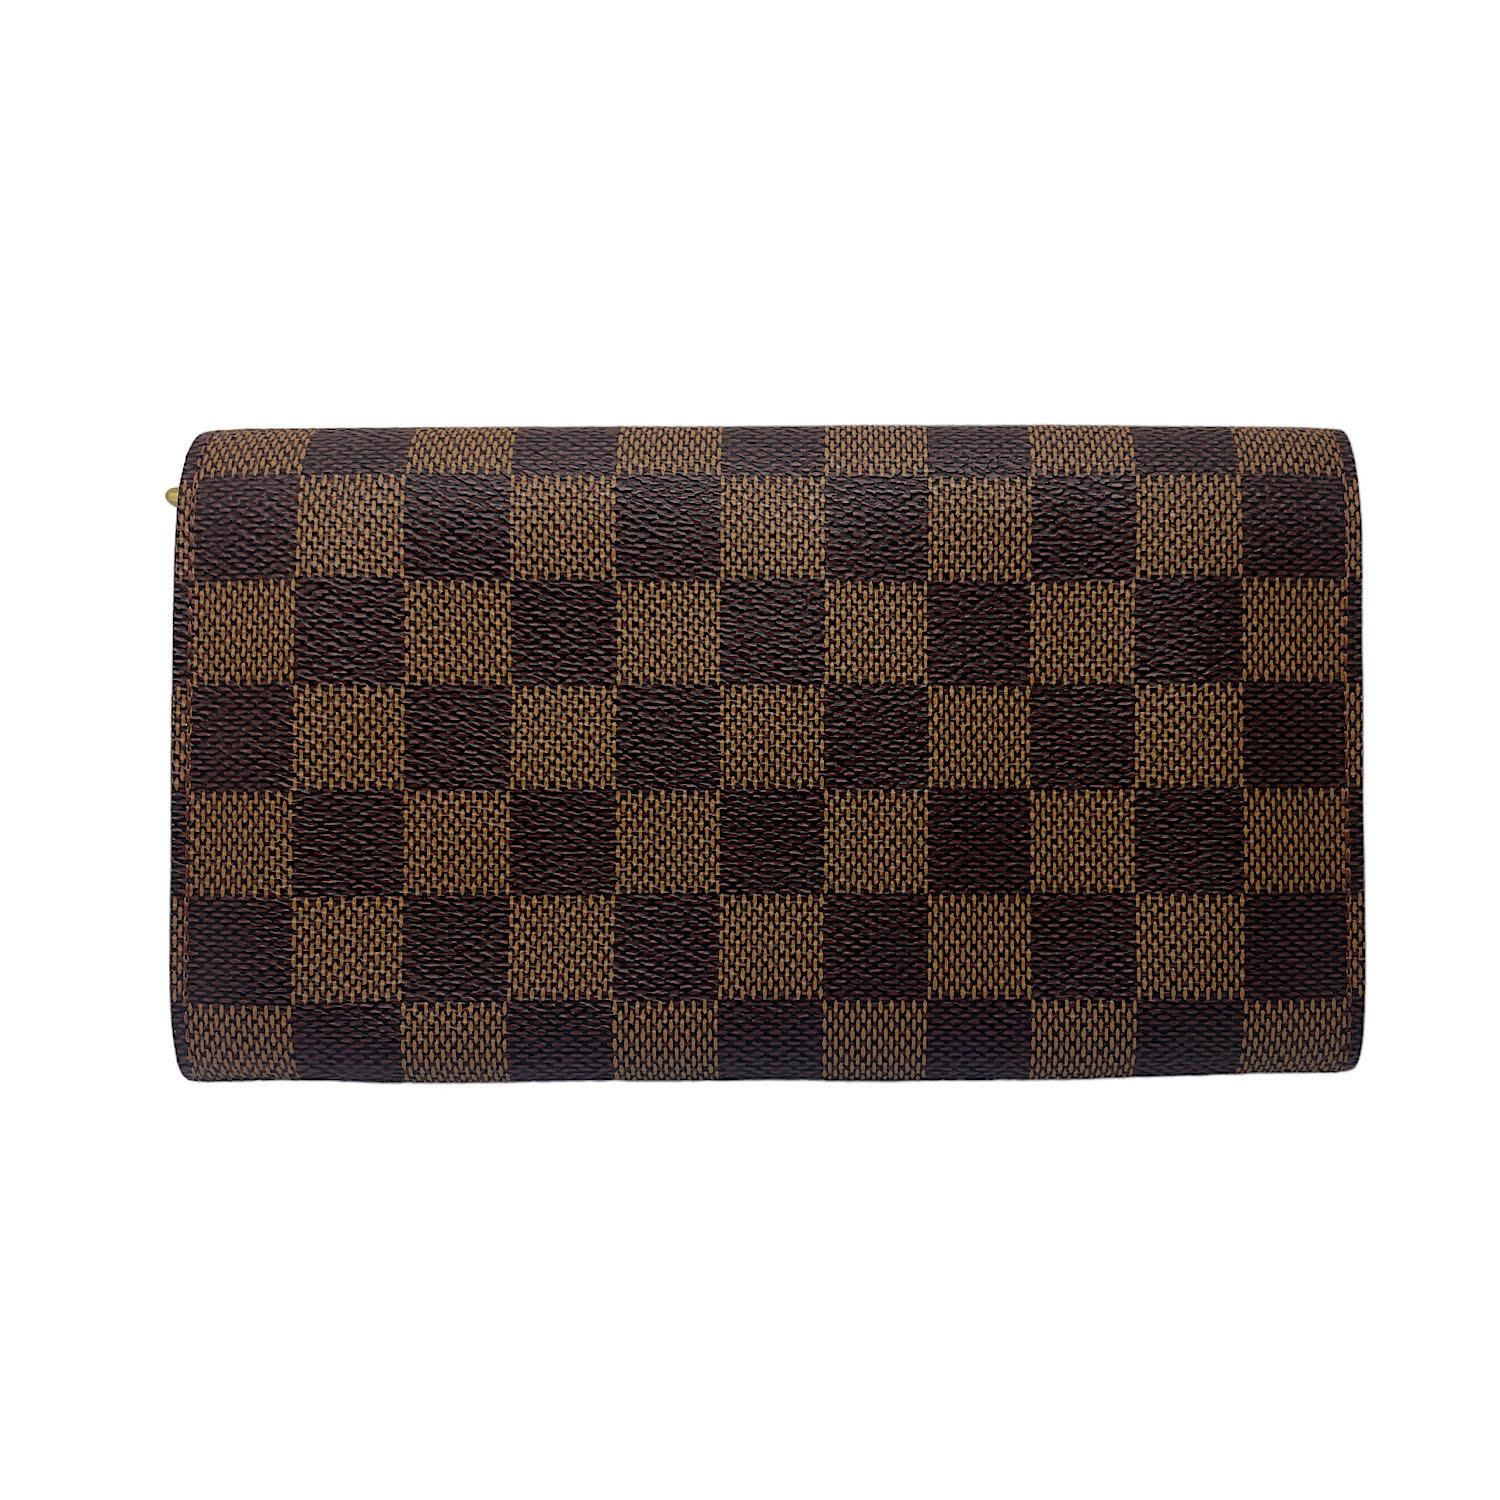 Brown and tan damier ebene coated canvas Louis Vuitton Sarah Wallet with brass hardware, single slit pocket at back, three interior compartments; one with zip closure, leather lining, Dual slip pockets. slip pocket, single bill compartment, snap